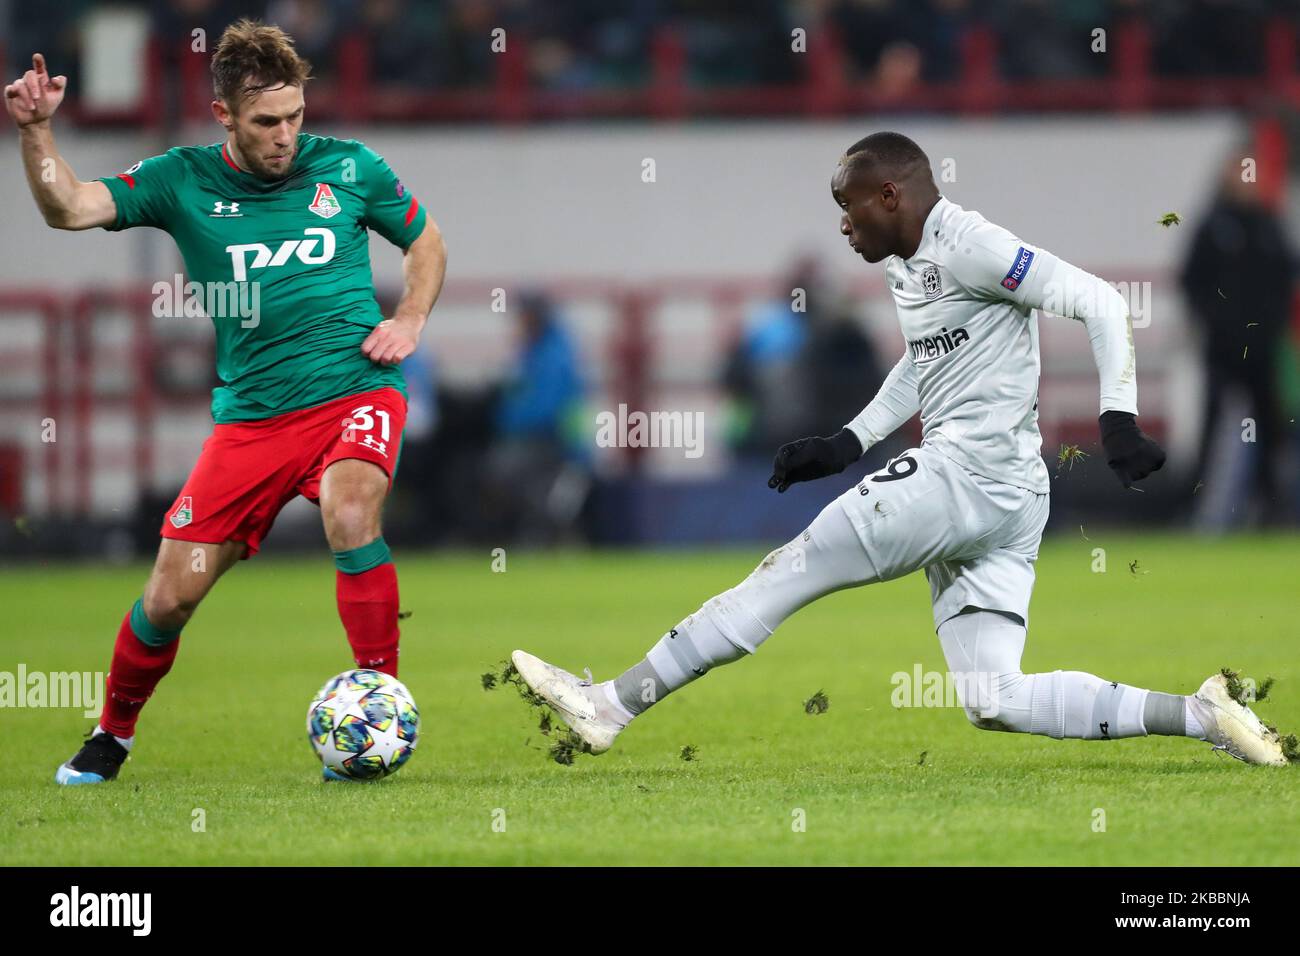 Maciej Rybus of FC Lokomotiv Moskva (L) and Moussa Diaby of Bayer Leverkusen vie for the ball during the UEFA Champions League group D match between FC Lokomotiv Moskva and Bayer Leverkusen at RZD Arena on November 26, 2019 in Moscow, Russia. (Photo by Igor Russak/NurPhoto) Stock Photo